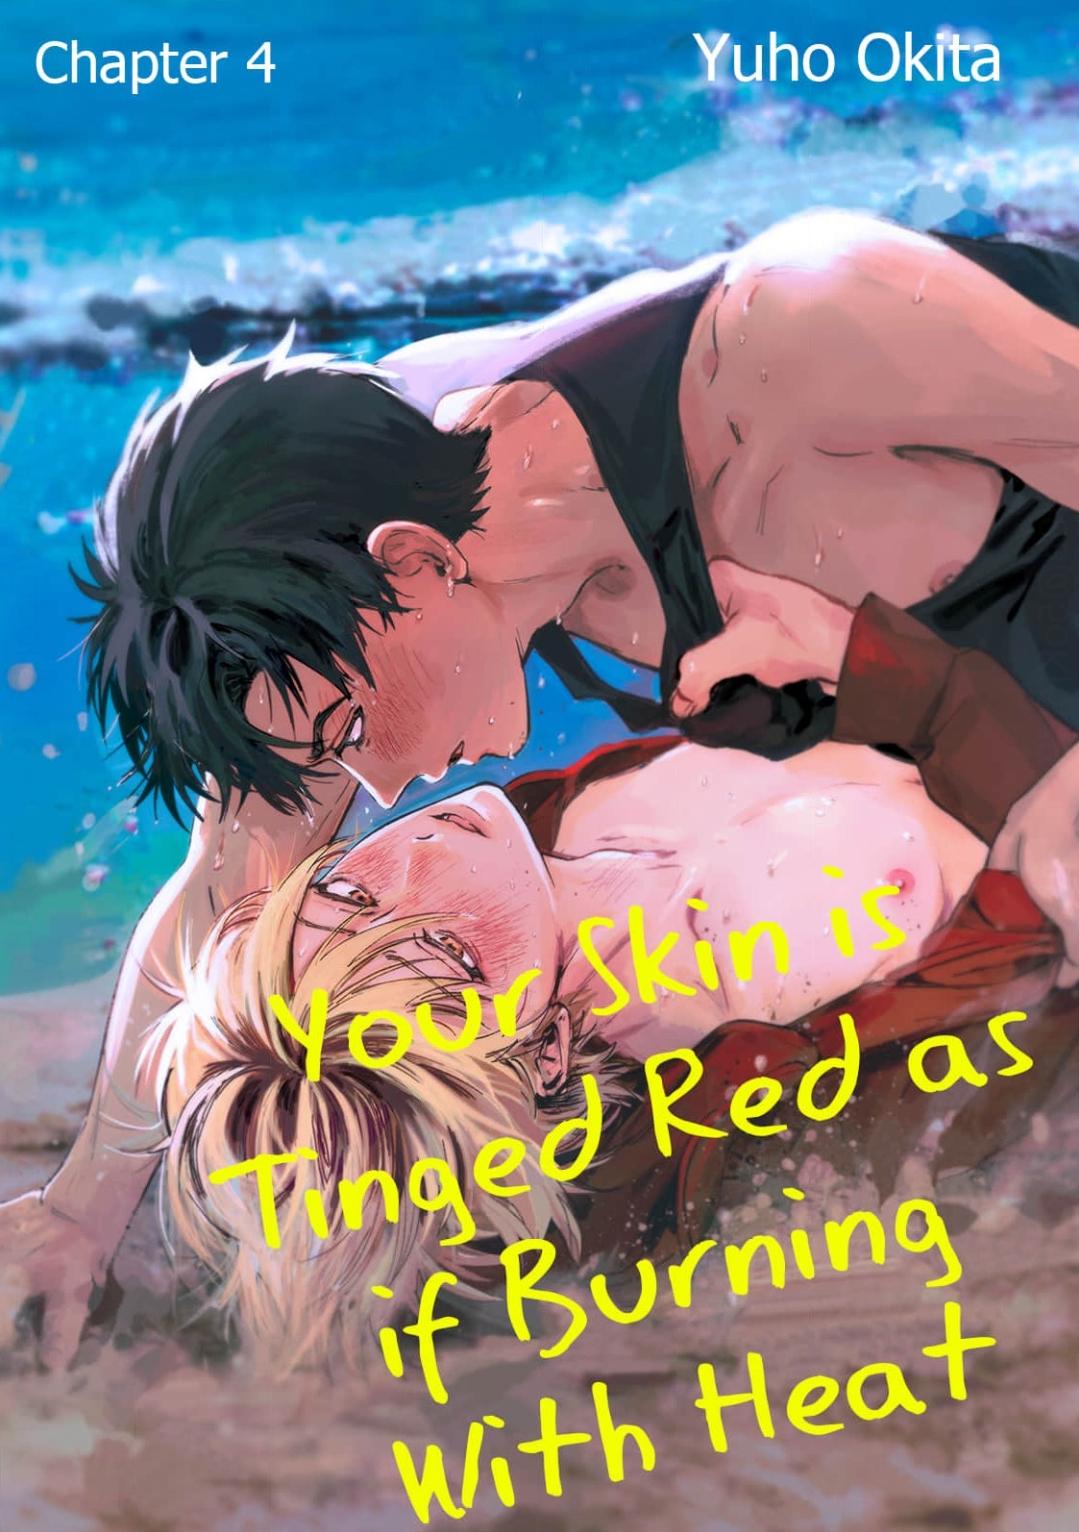 Your Skin Is Tinged Red As If Burning With Heat - Page 1